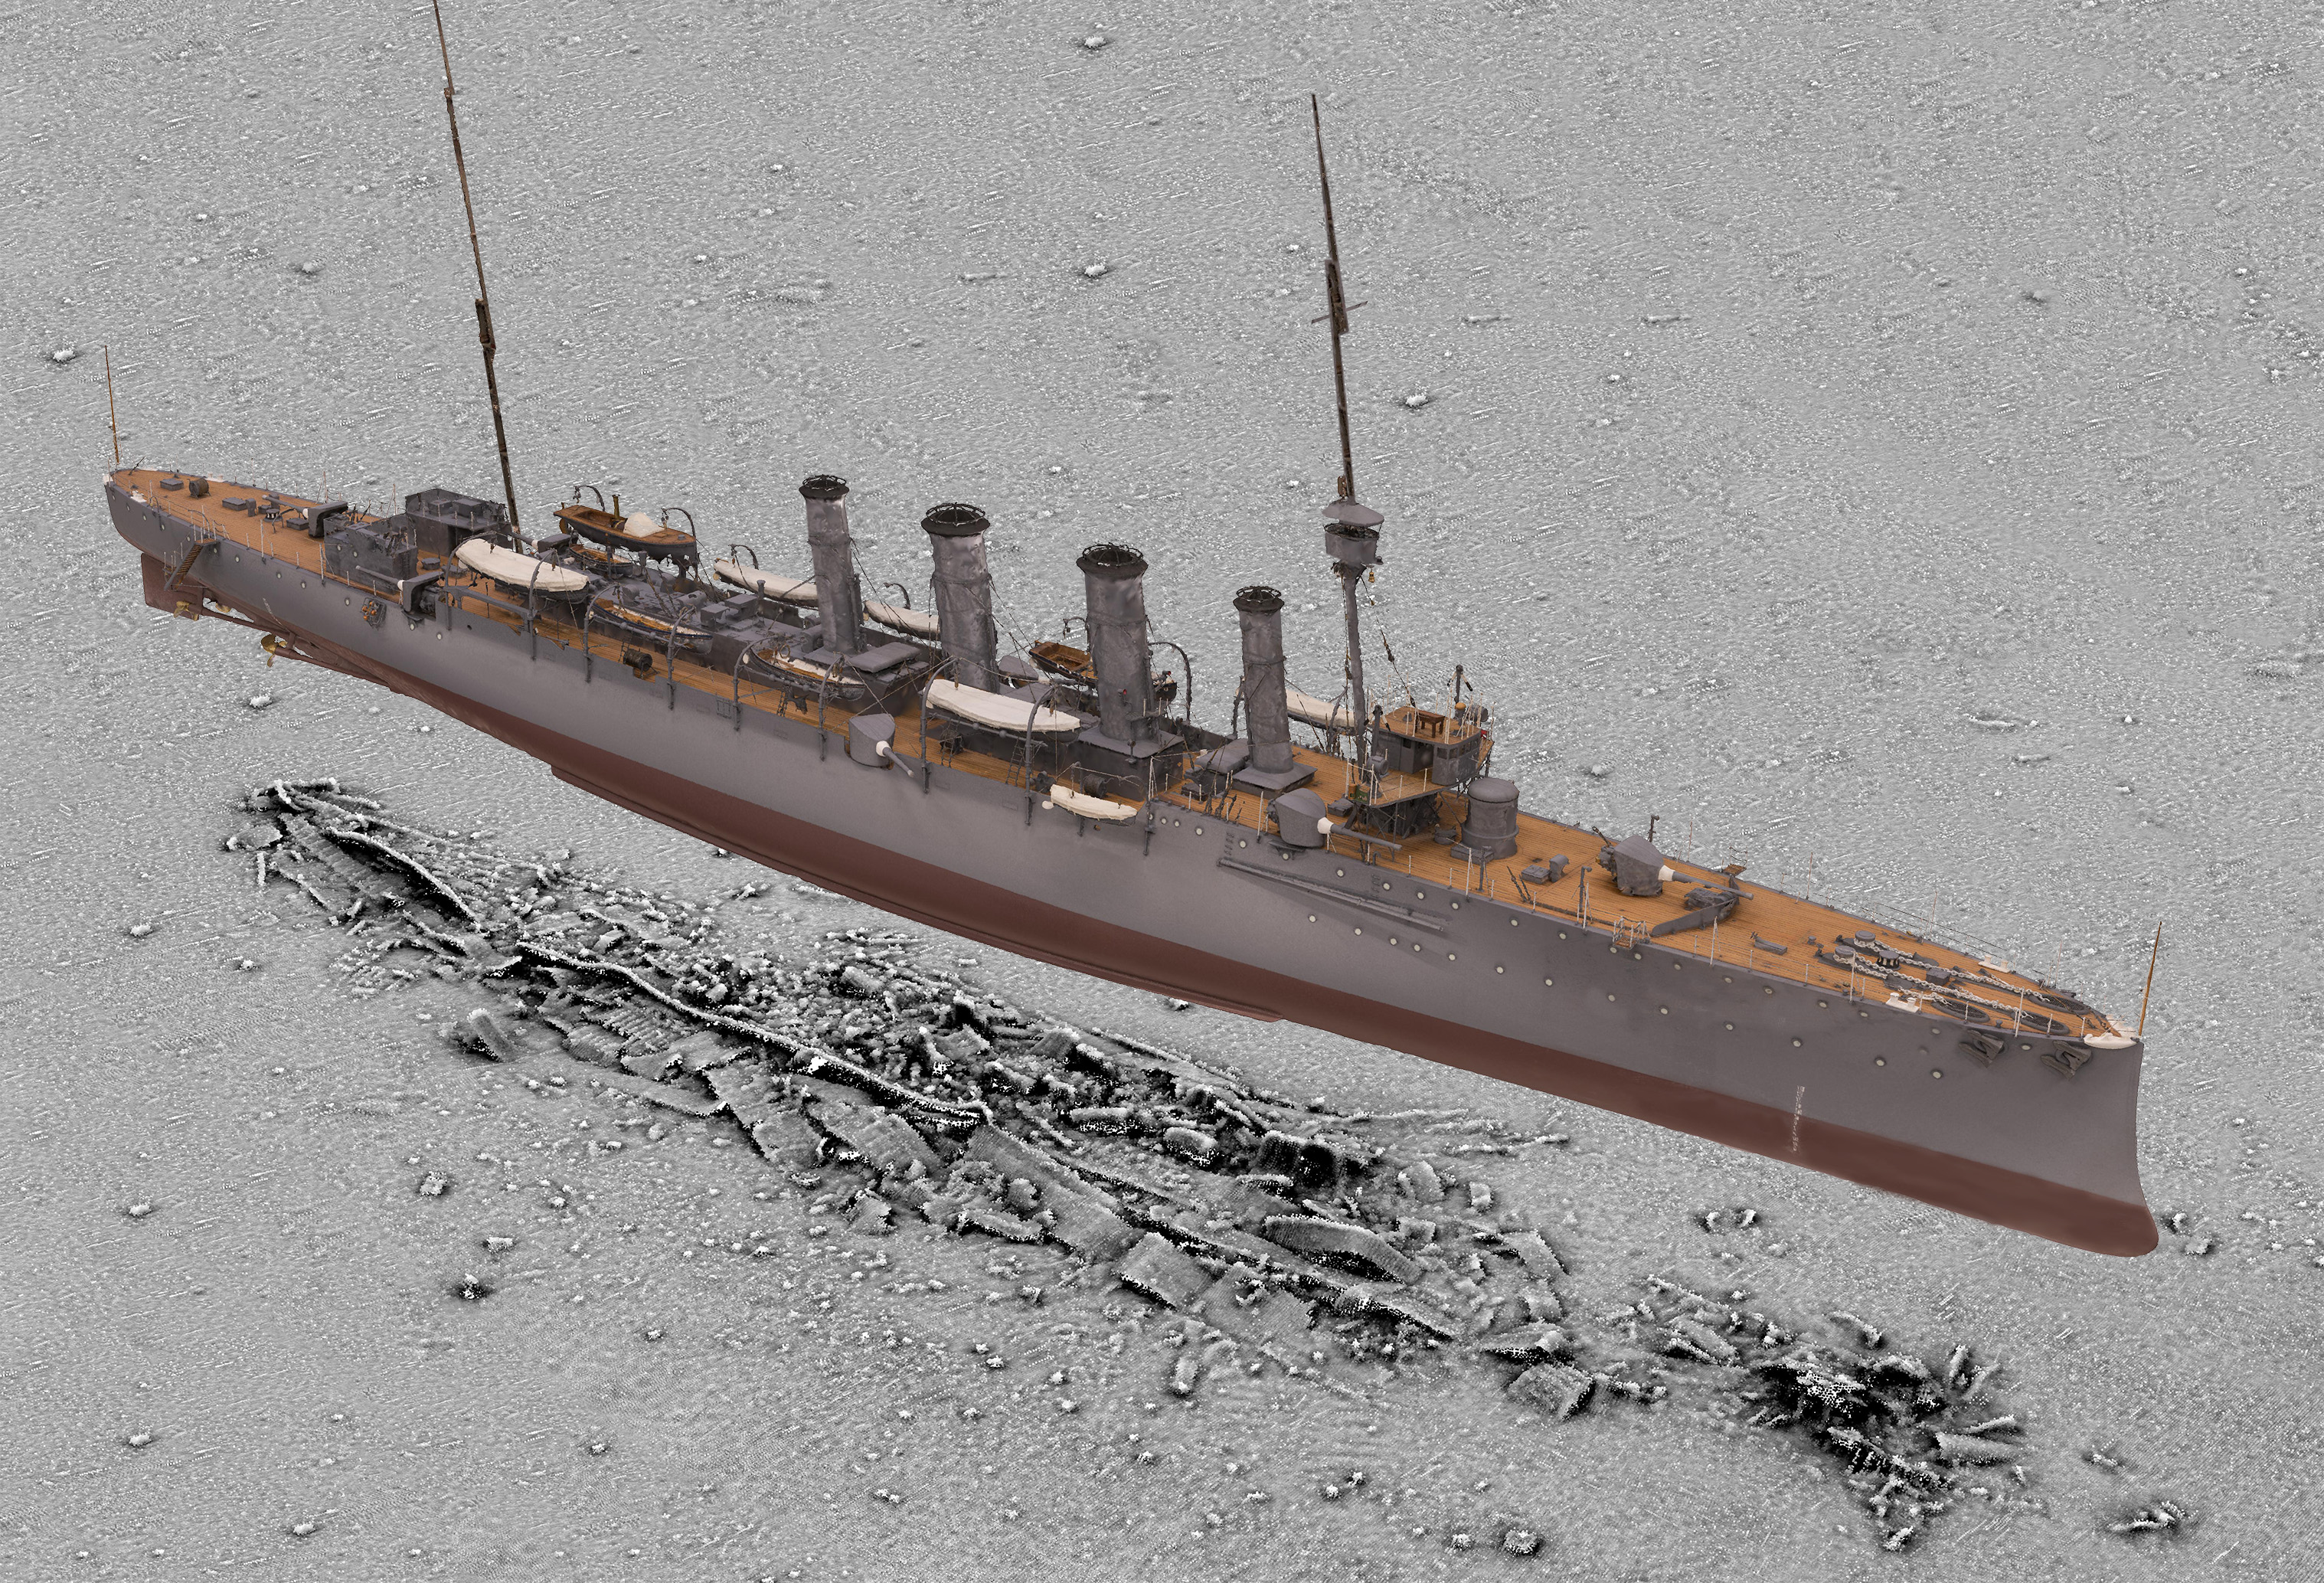 A 3D scan of HMS Falmouth by Historic England's imaging team superimposed on a seabed survey of the wreck. The survey was carried out in partnership with the Maritime and Coastguard Agency © Historic England